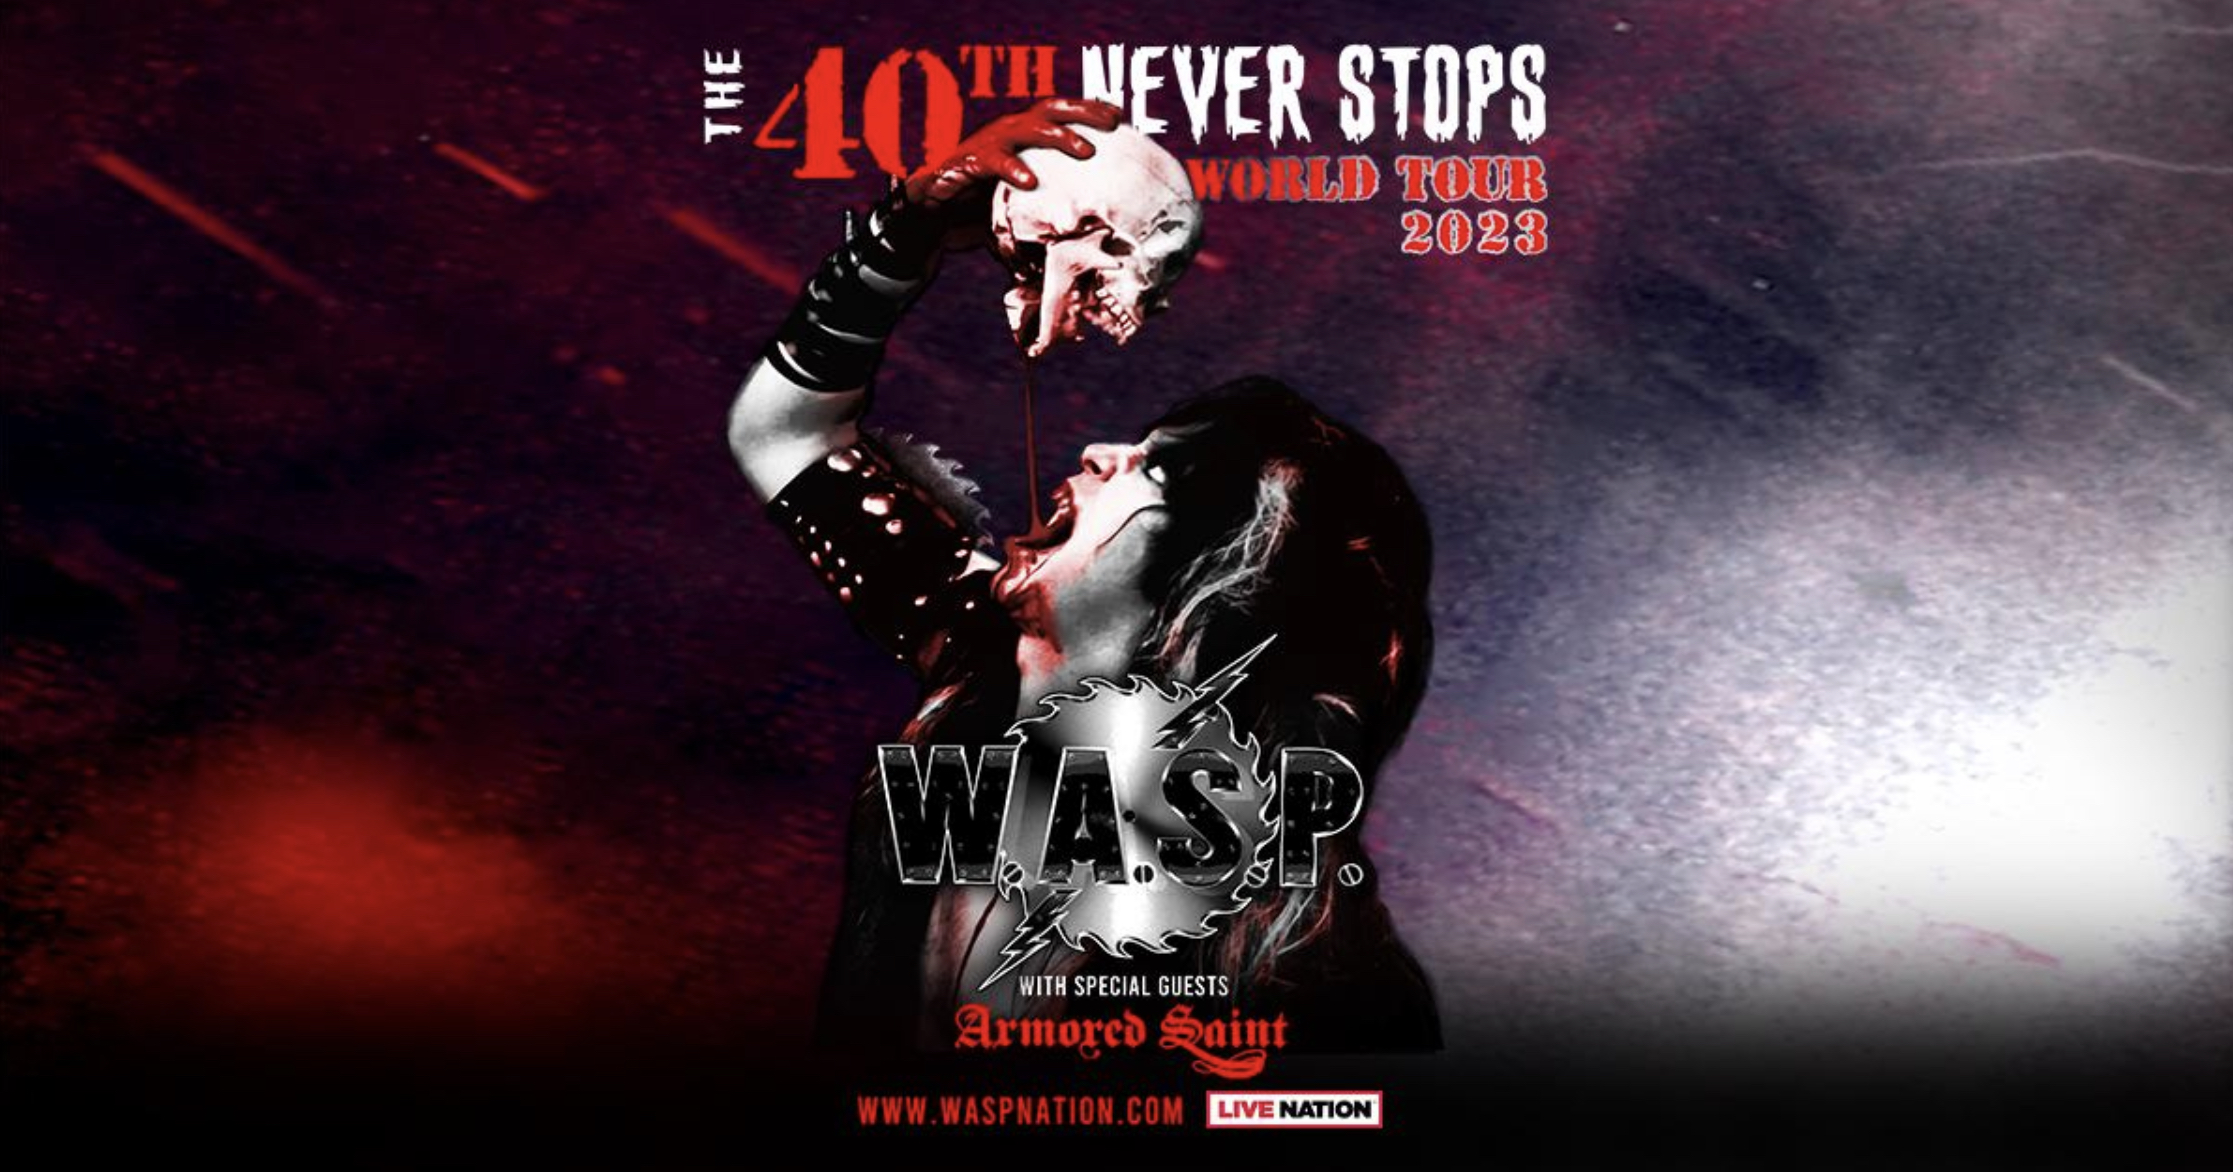 W.A.S.P. “The 40th Never Stops World Tour 2023”